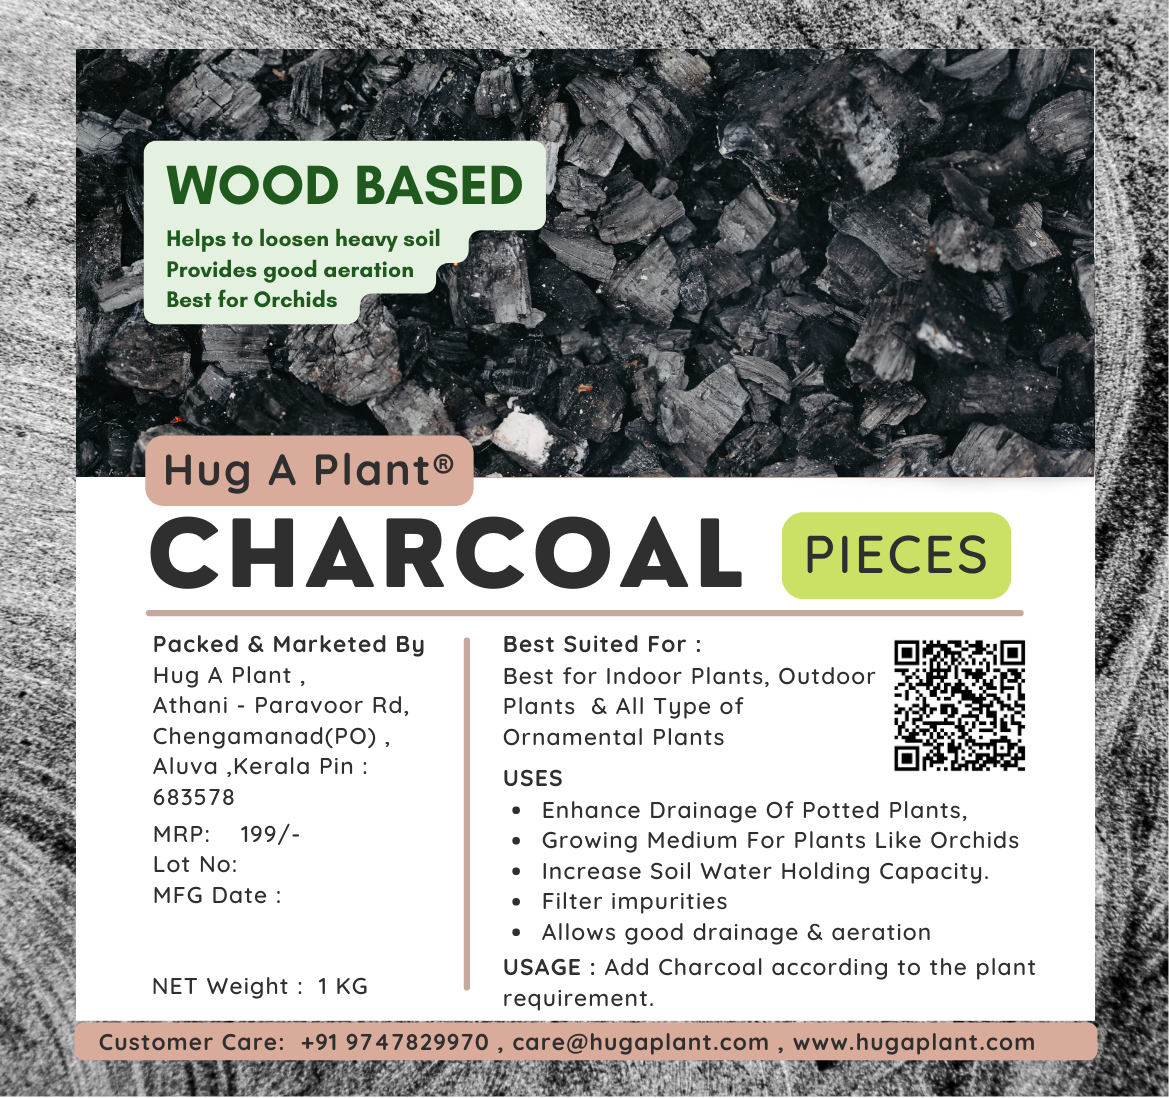 Organic Horticultural Charcoal & Terrarium Charcoal | Charcoal for Plants |  Pure Hardwood Charcoal for Planting and Gardening | Organic Canadian Maple